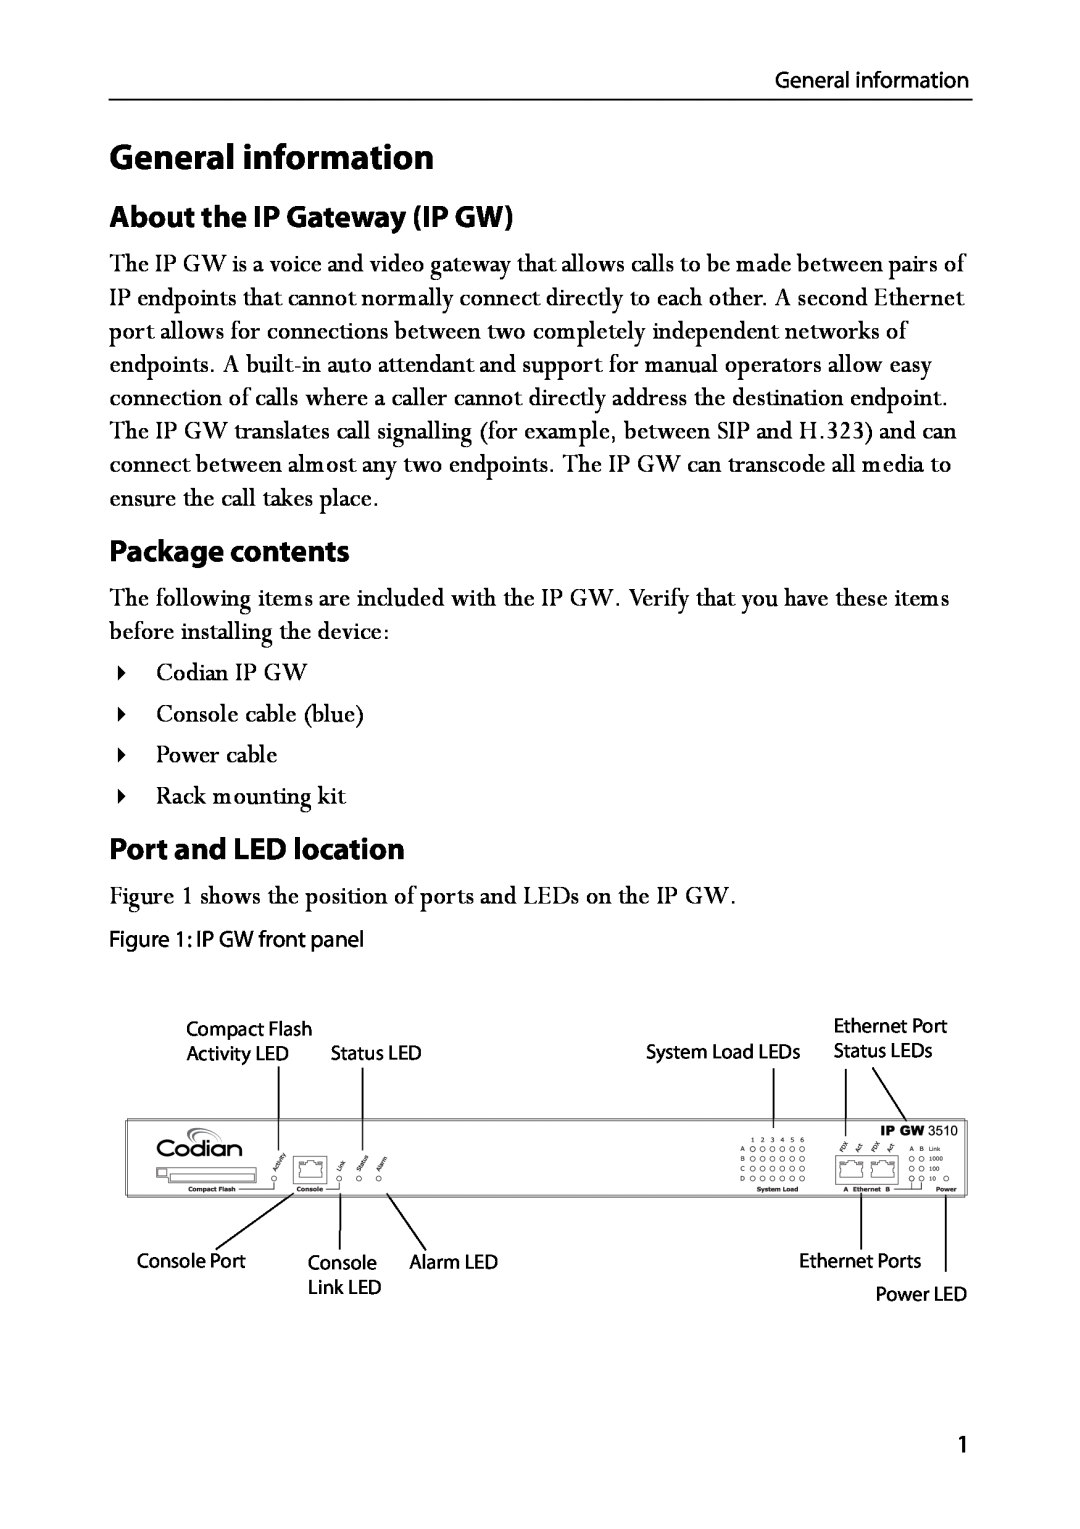 TANDBERG IP GW 3500 manual General information, About the IP Gateway IP GW, Package contents, Port and LED location 